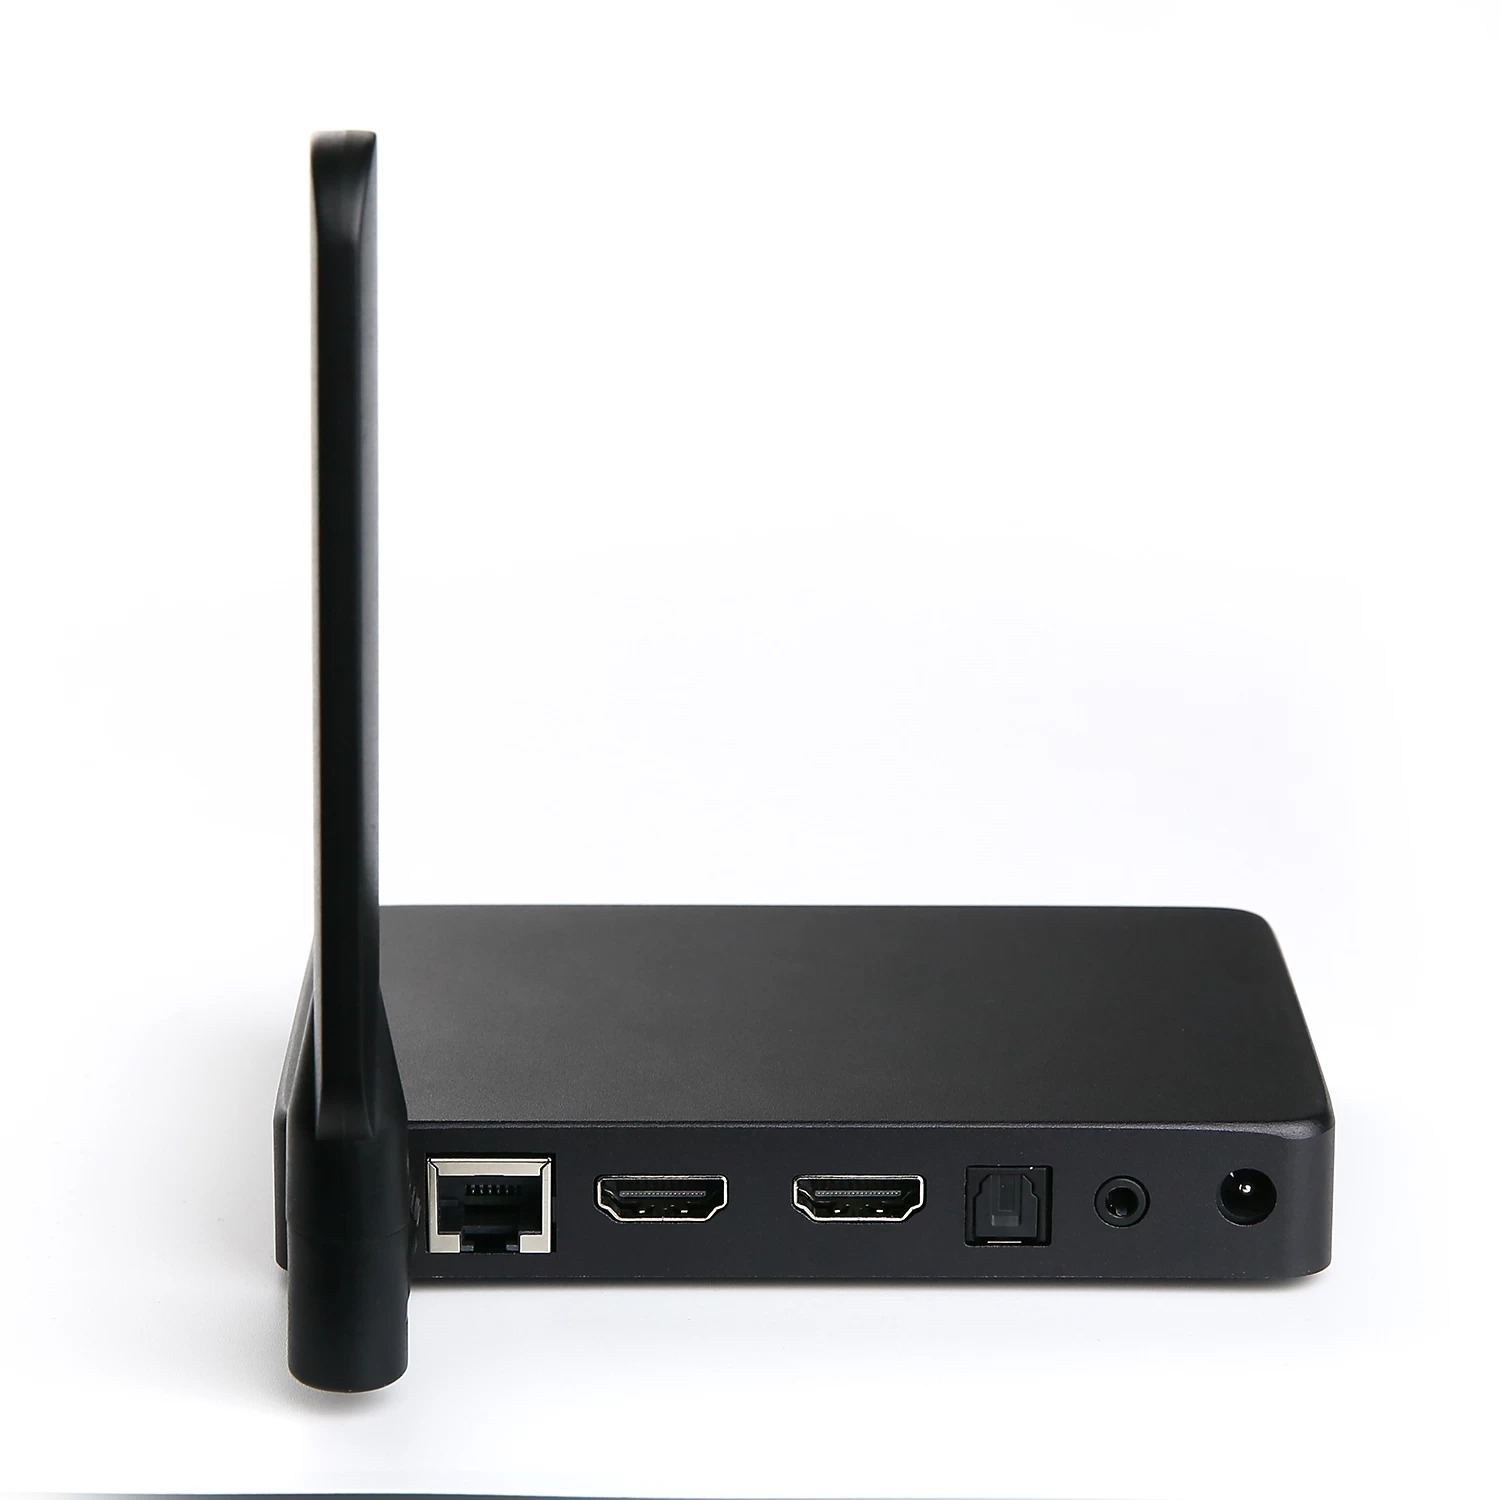 Android Tv Box solution provider, Android TV Box Custom, Android TV Box supported LED/LCD